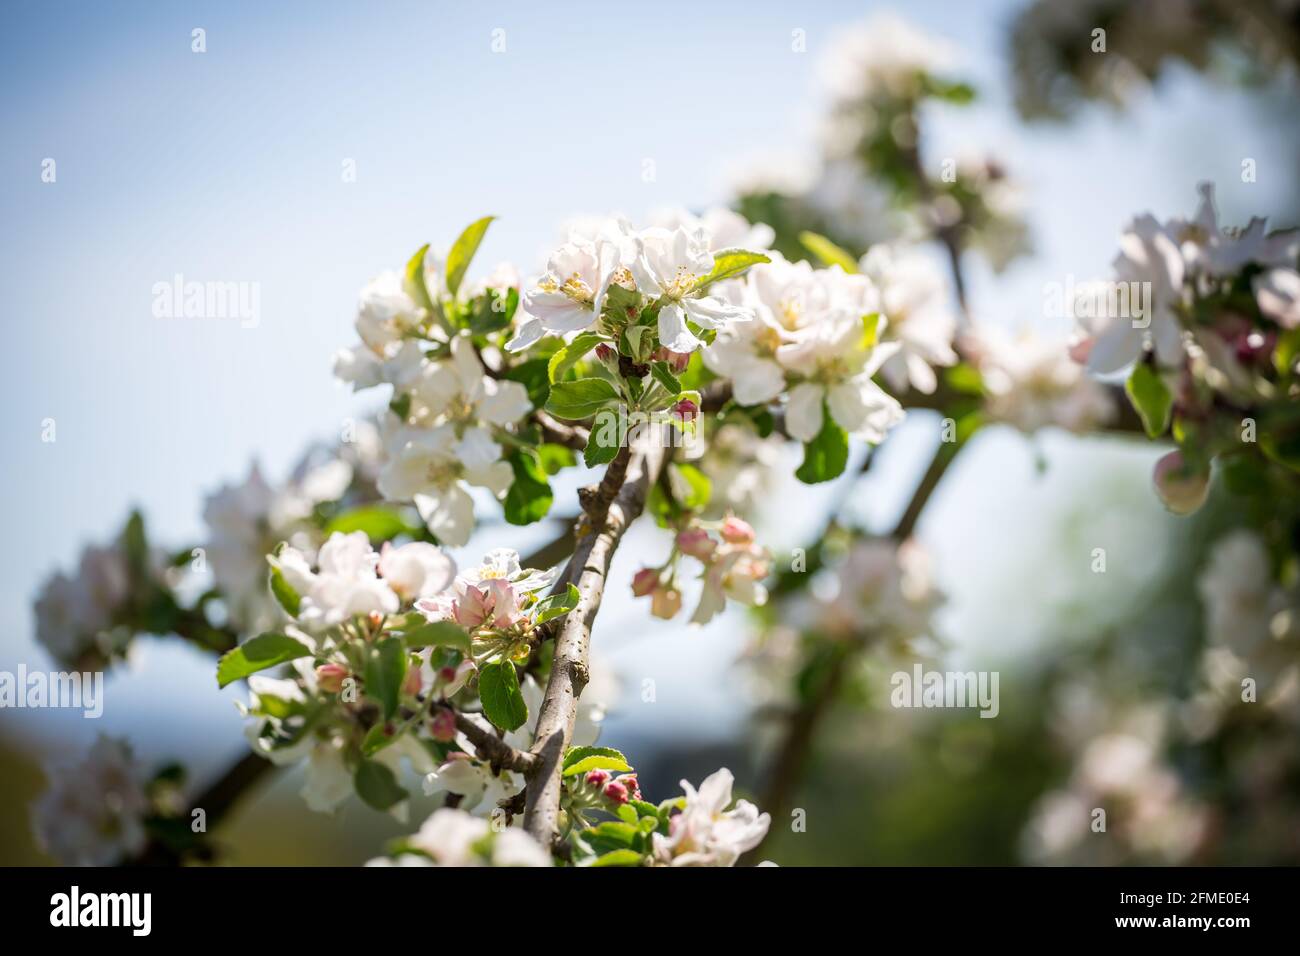 Fruit tree blossoms in spring Stock Photo